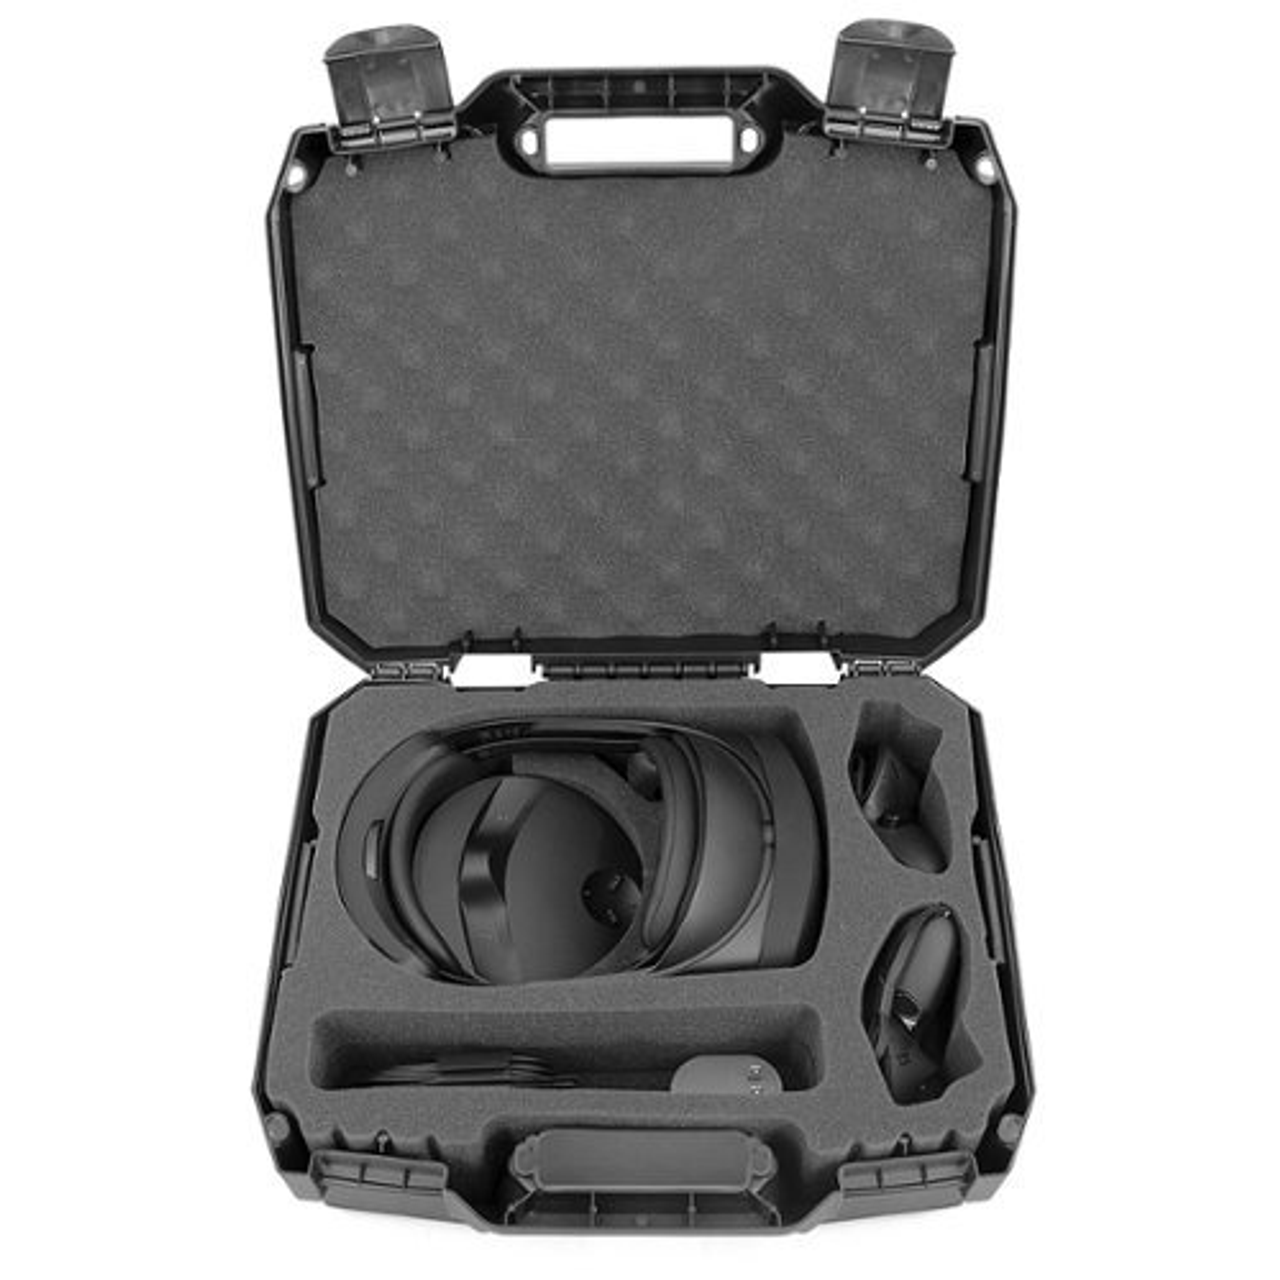 CASEMATIX - Hard Shell Case for Meta Quest Pro VR Headset